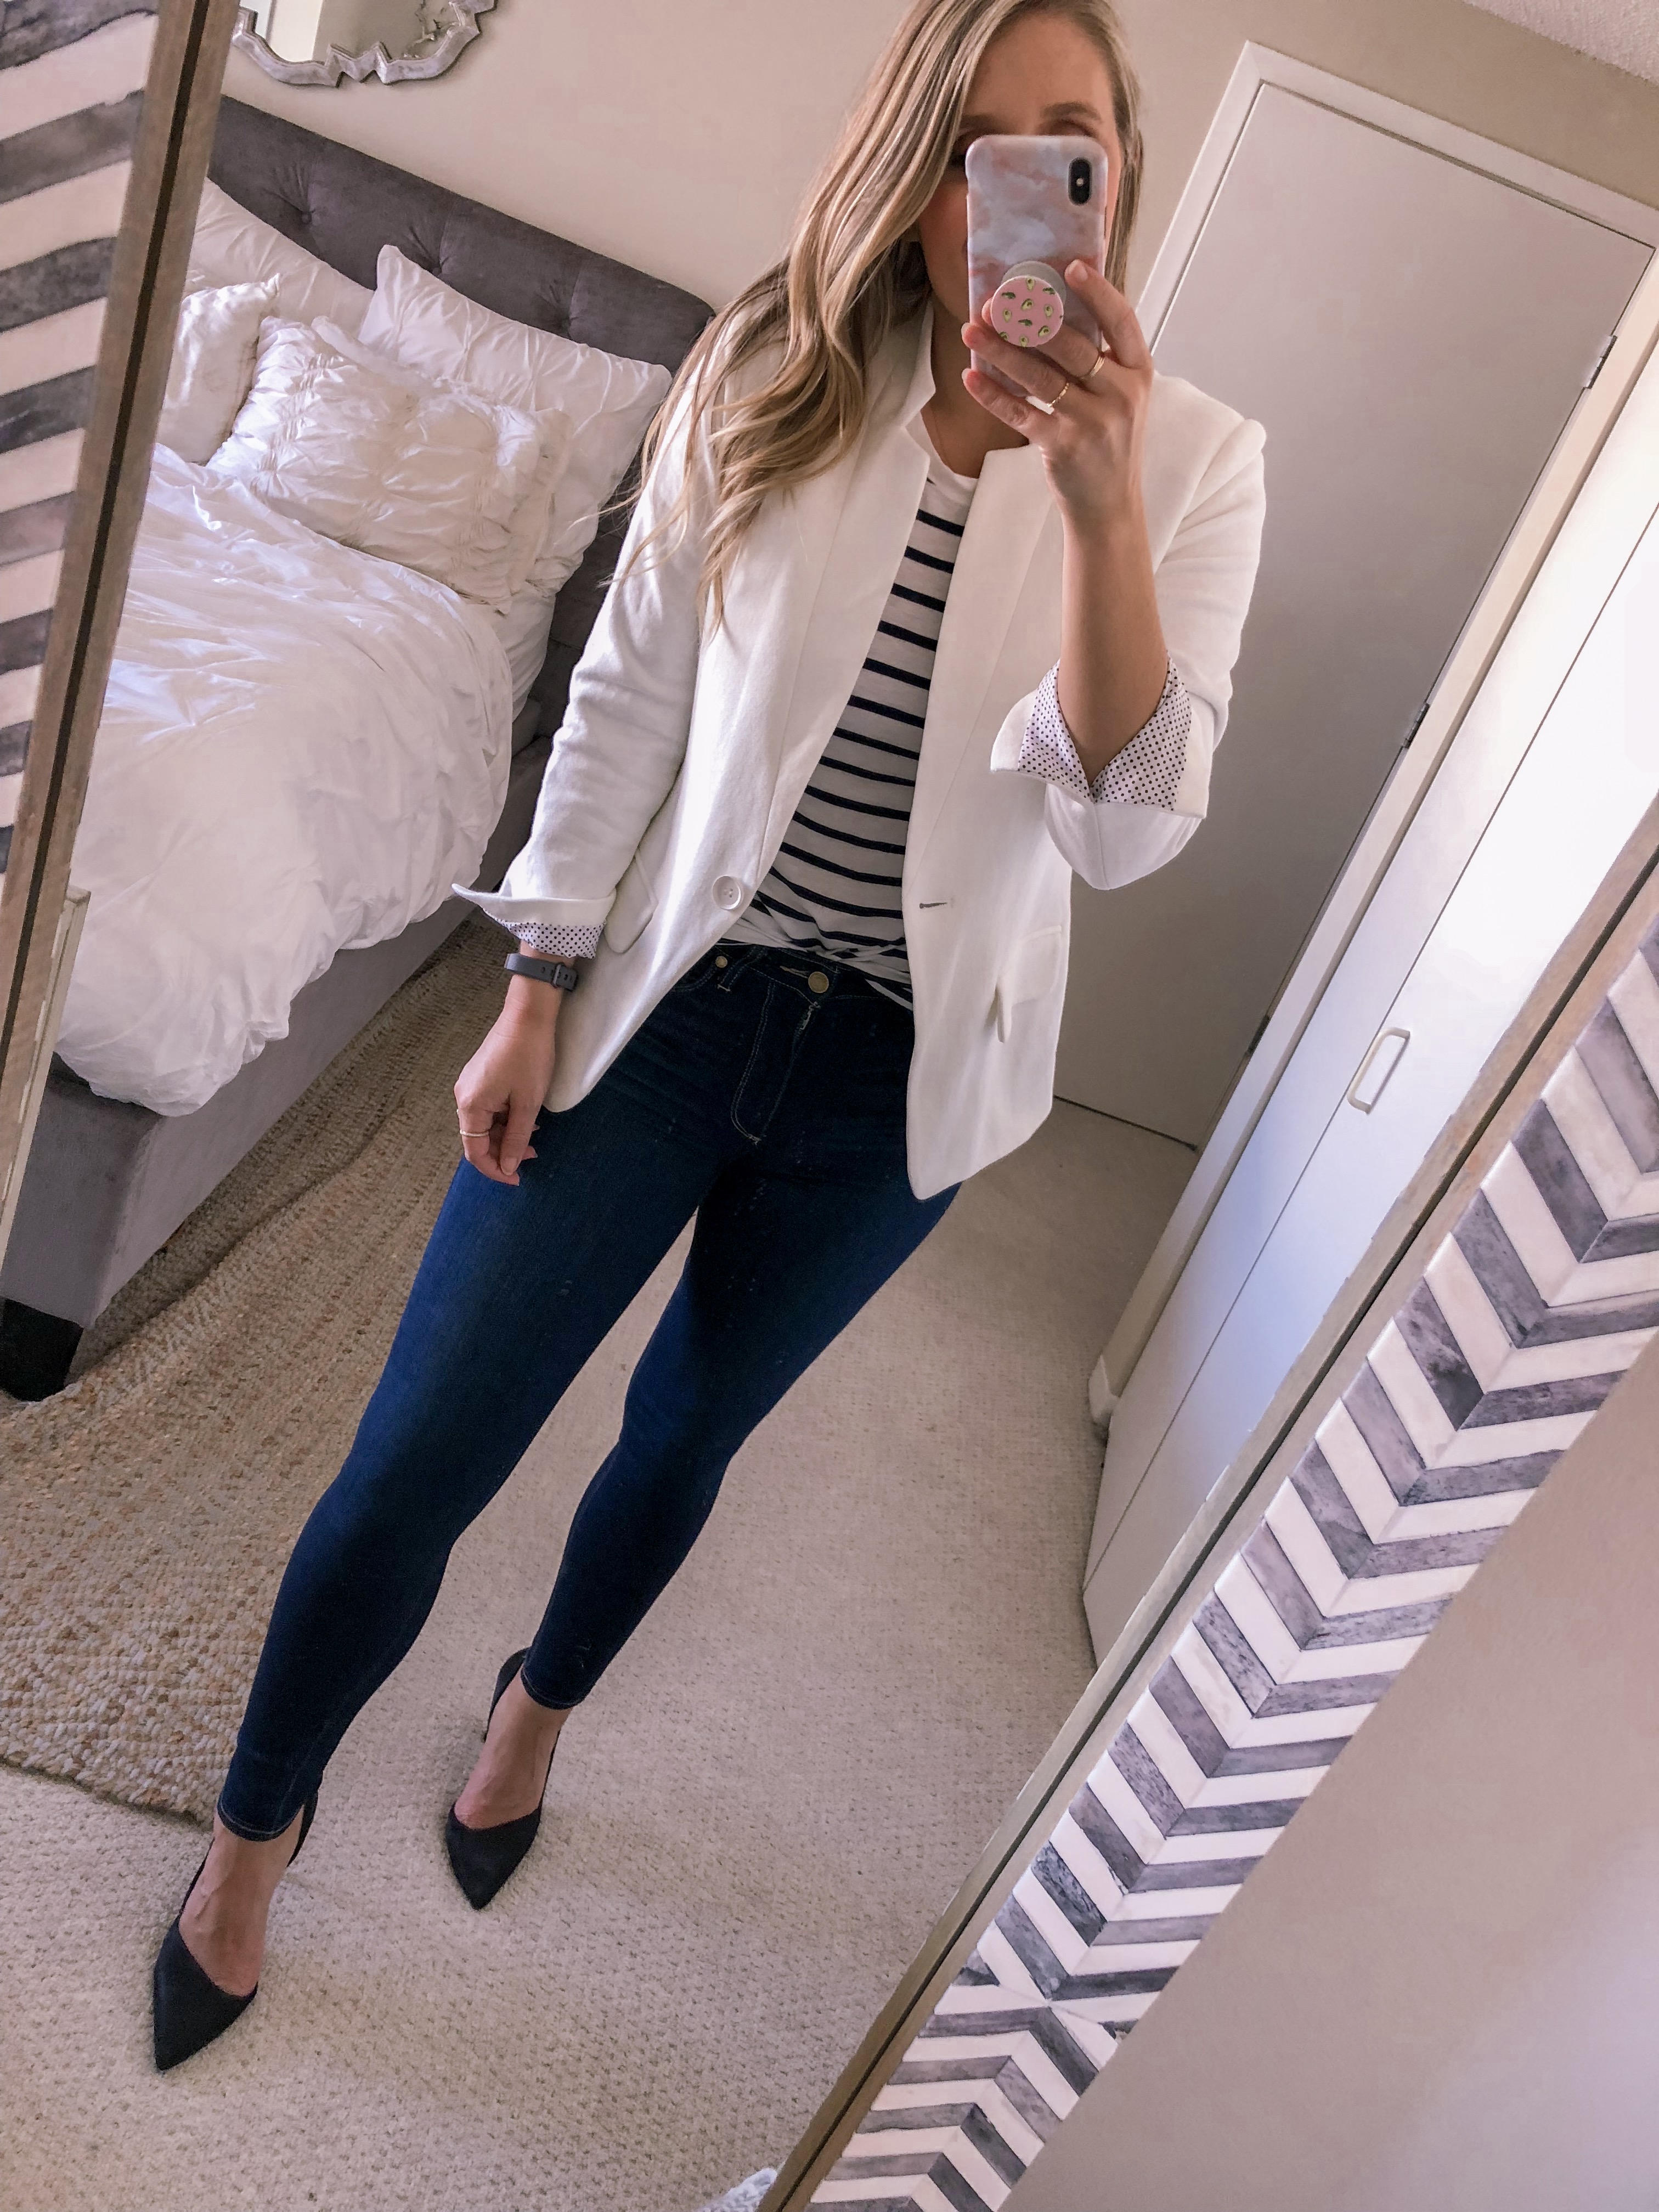 Visions of Vogue shares an Olivia Moon White Cotton Blazer, Aerie Striped Tee, and high waist skinny jeans for a business casual work outfit ideas.